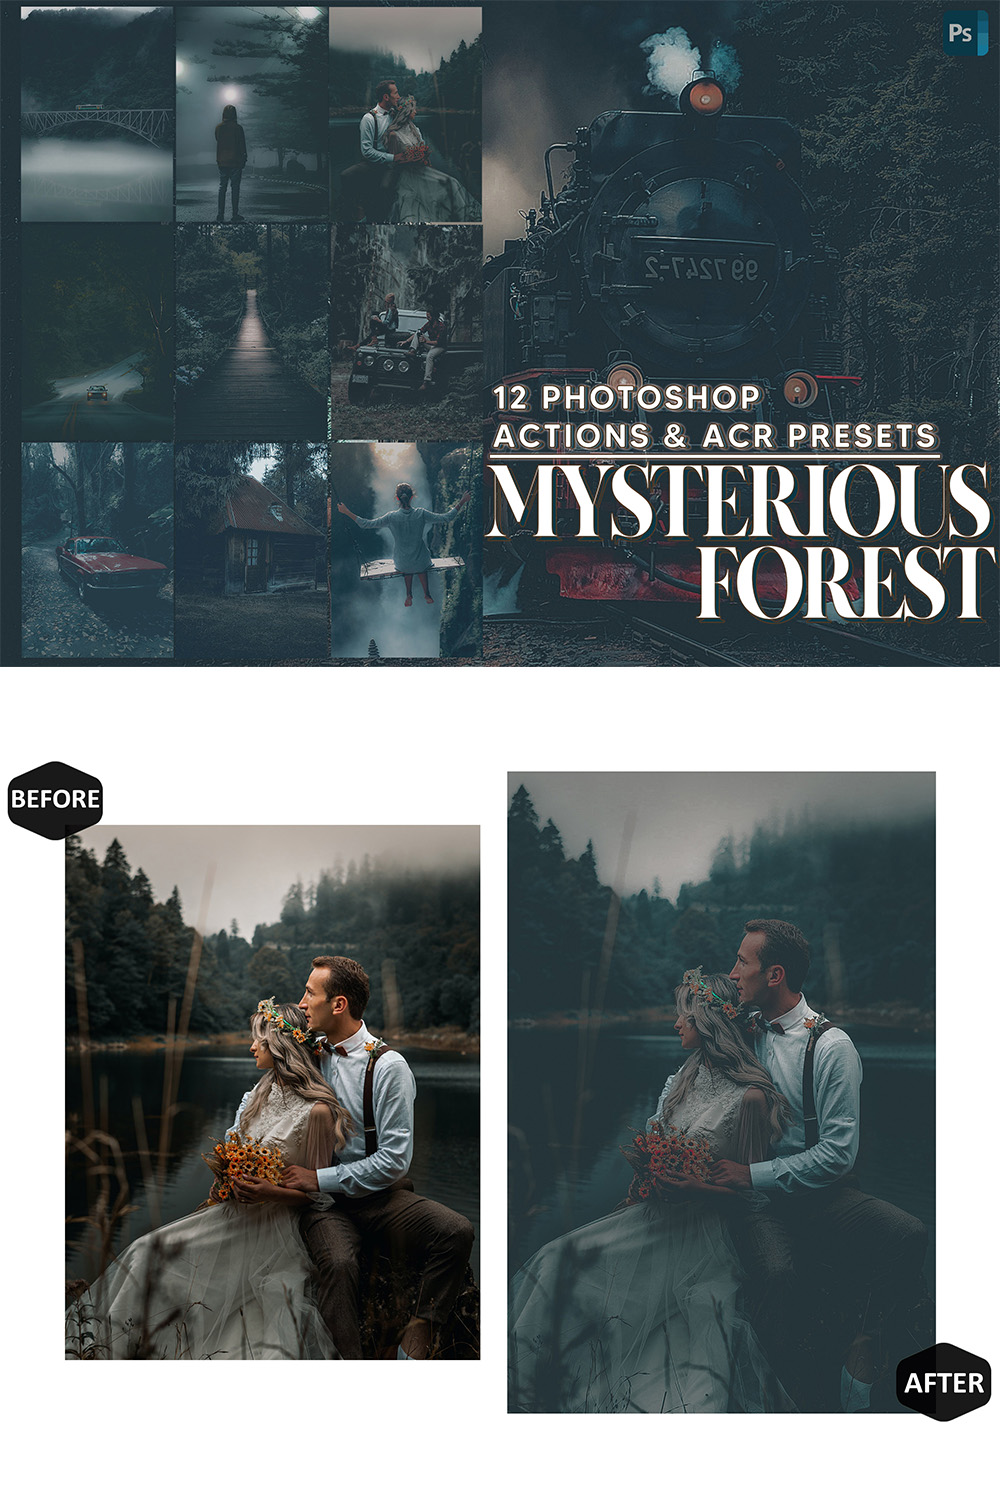 12 Photoshop Actions, Mysterious Forest Ps Action, Halloween ACR Preset, Cloudy Ps Filter, Atn Portrait And Lifestyle Theme For Instagram, Blogger pinterest preview image.